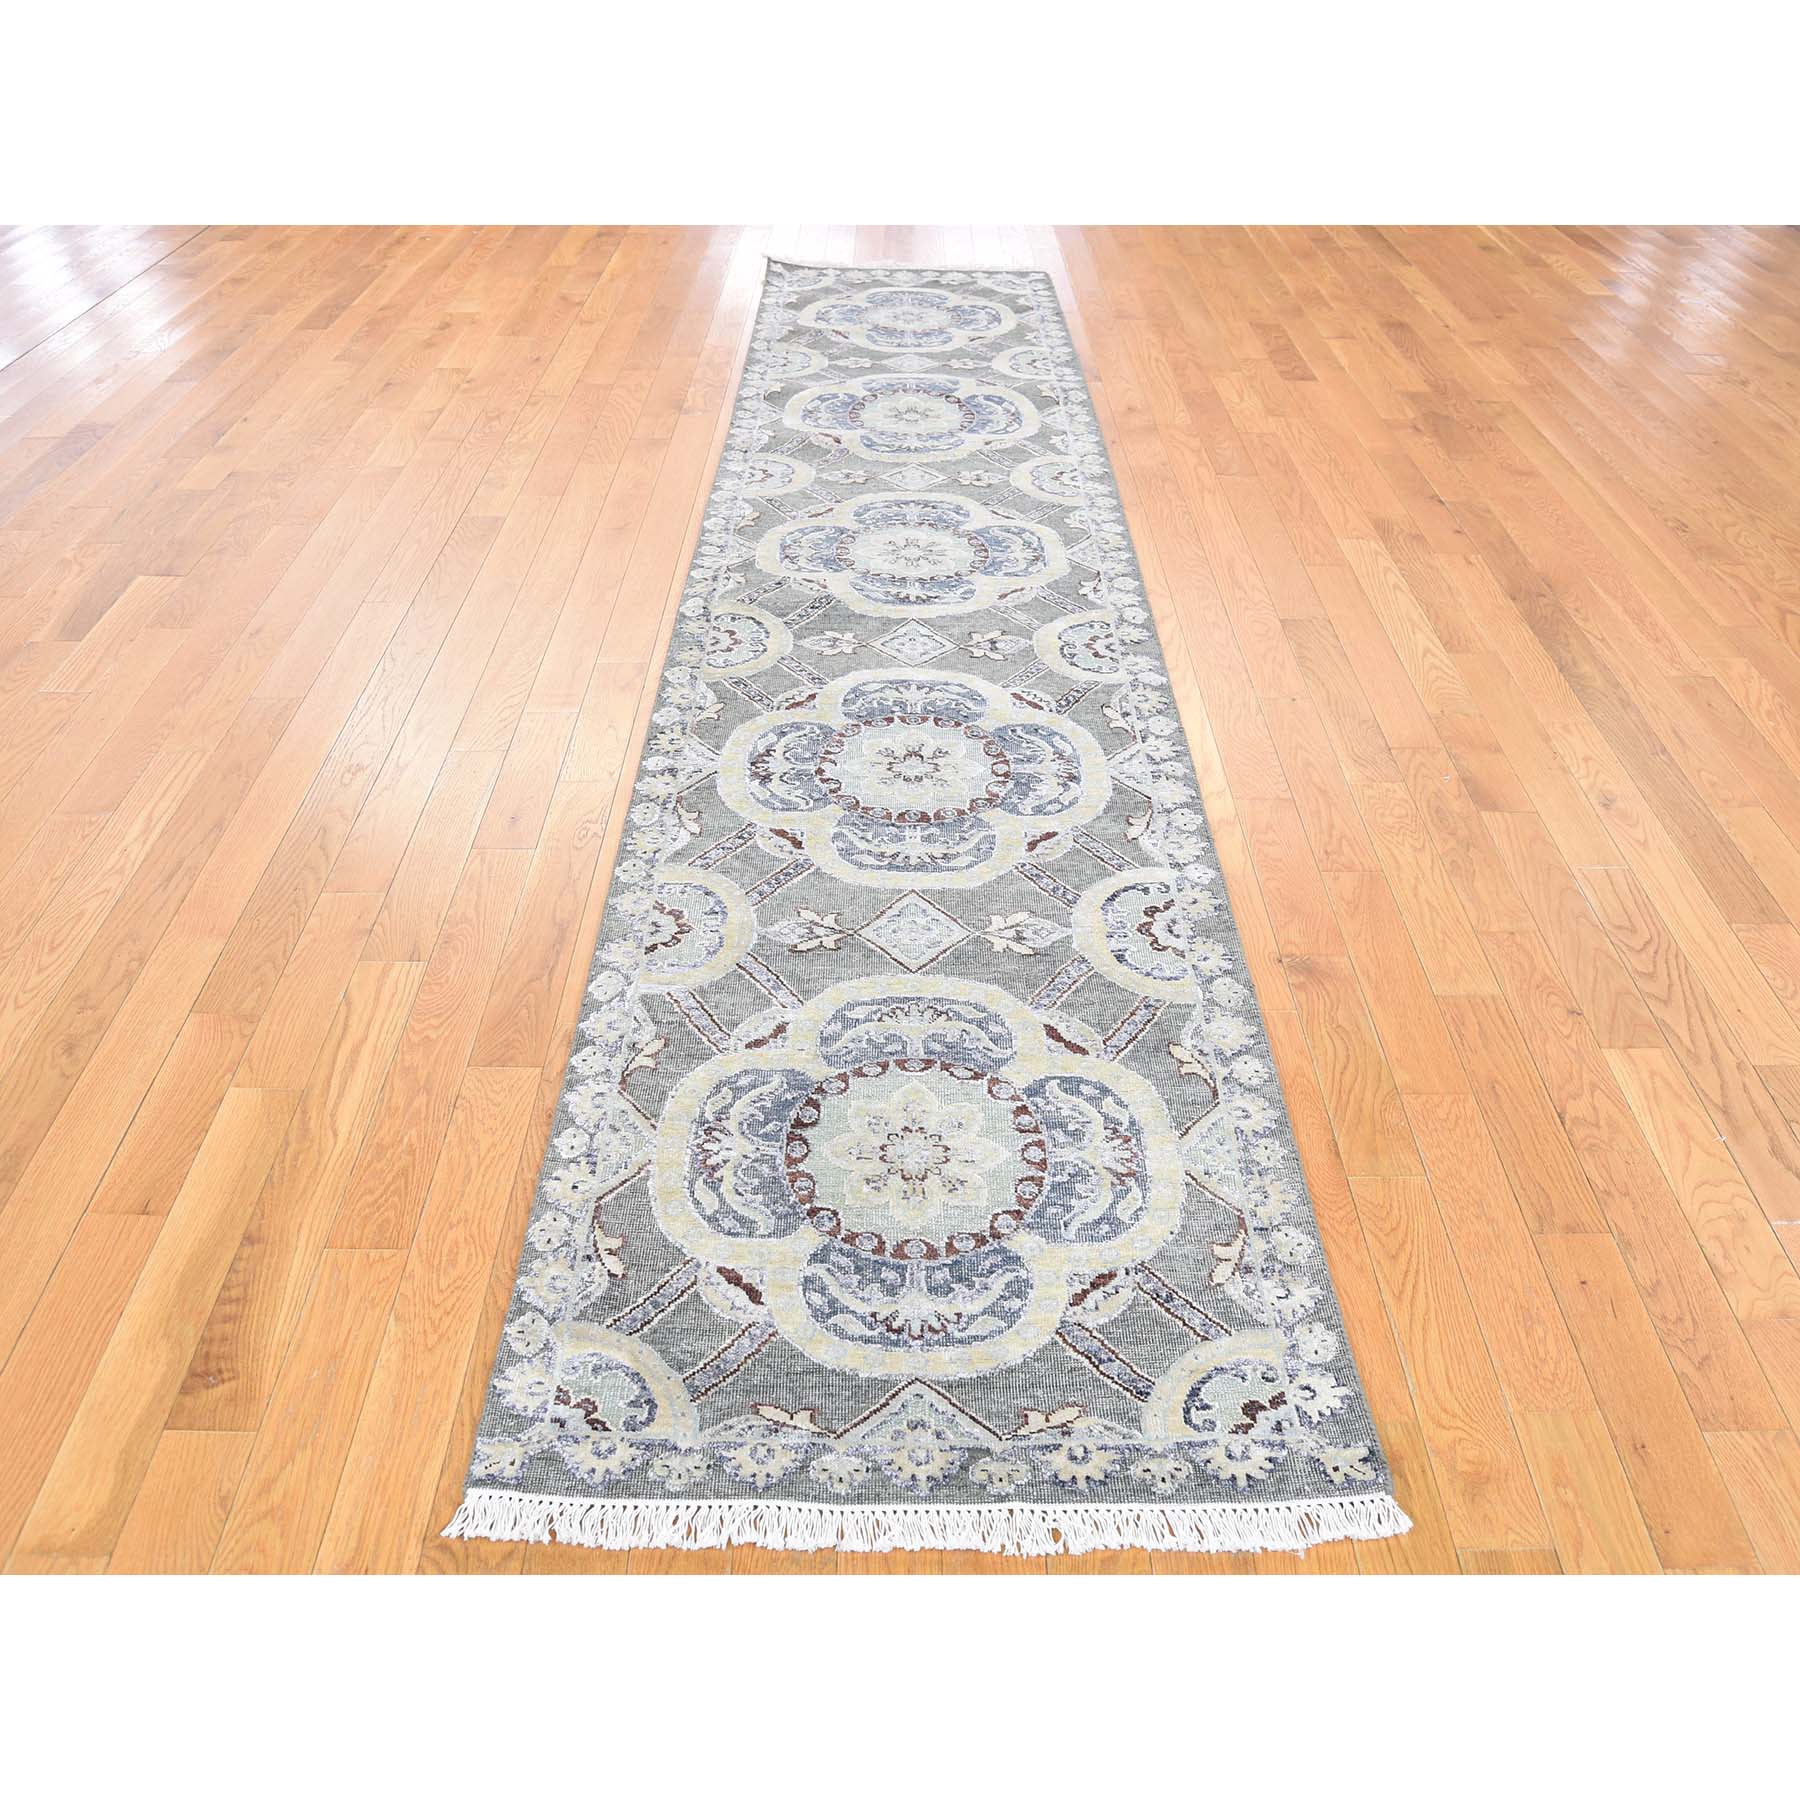 2-6 x12- Silk with Textured Wool Rosette Design Hand-Knotted Oriental Rug 